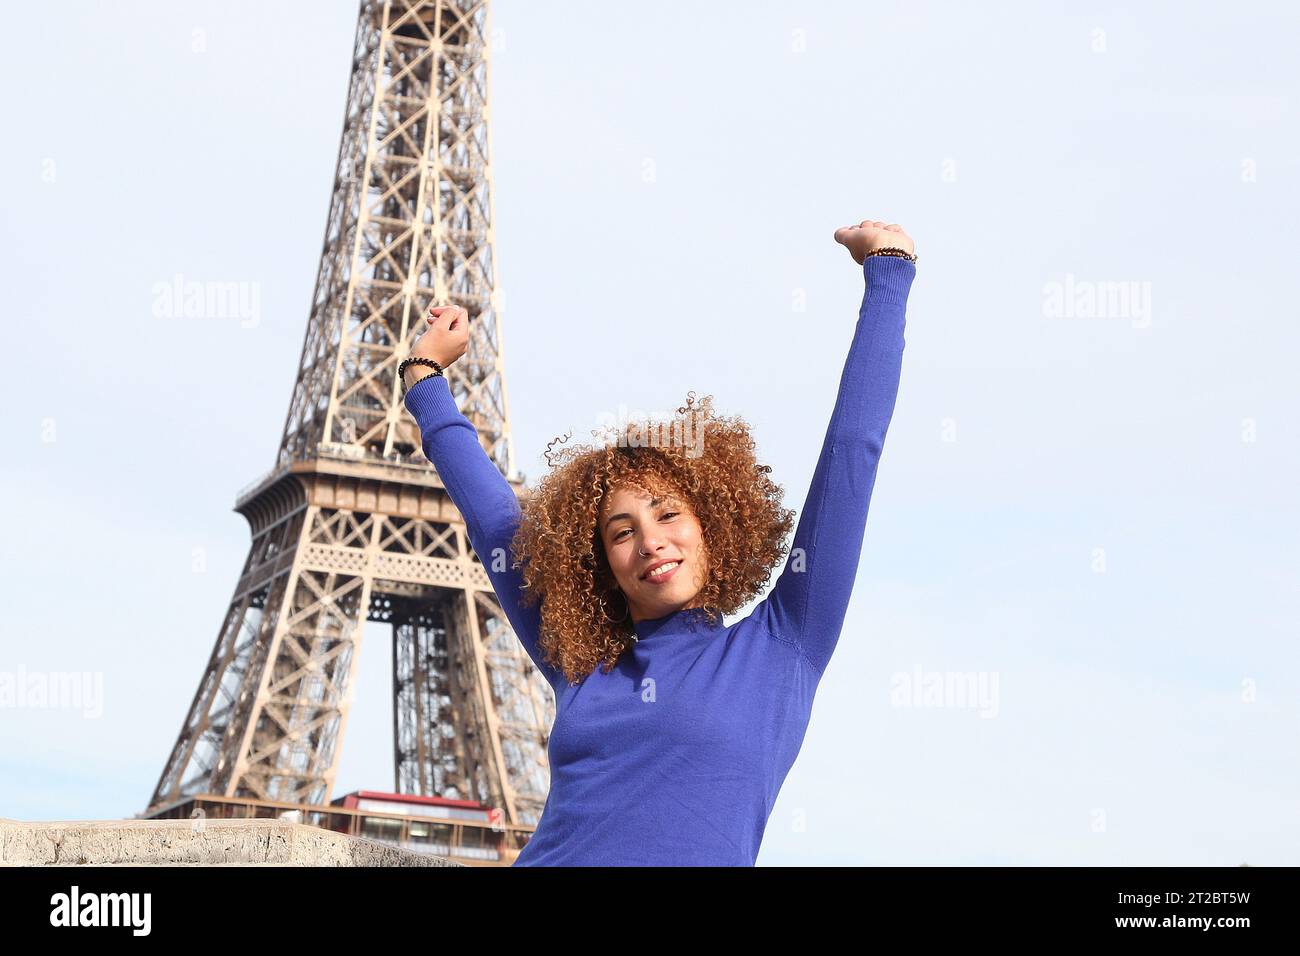 HAPPY CURLY HAIR YOUNG WOMAN IN BLUE SWEATER HAVING A GOOD TIME AT THE EIFFEL TOWER Stock Photo